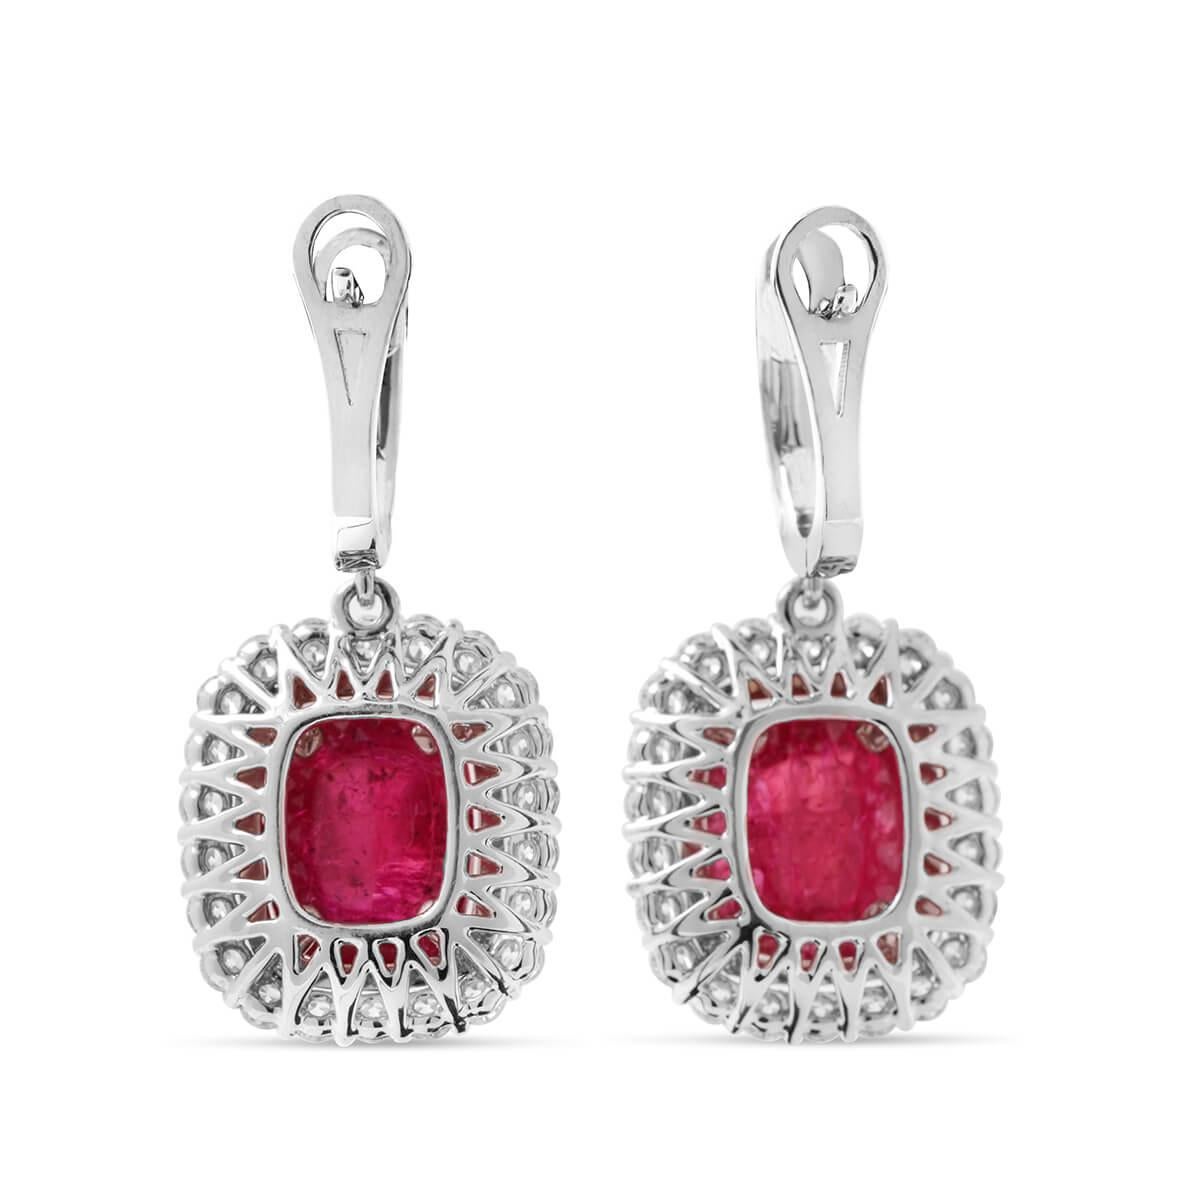 Natural, unheated Ruby Earrings. 

18 Karat White Gold. 

STONE TYPE	Ruby
DISPLAY COLOR	Red
SHAPE	Cushion
WEIGHT (MAIN STONE)	12.11
SIDE STONES WEIGHT (CT.)	2.73
ORIGIN	Tanzania
GOLD WEIGHT (G)	9.10
MEASUREMENTS	11.01x8.86x6.38